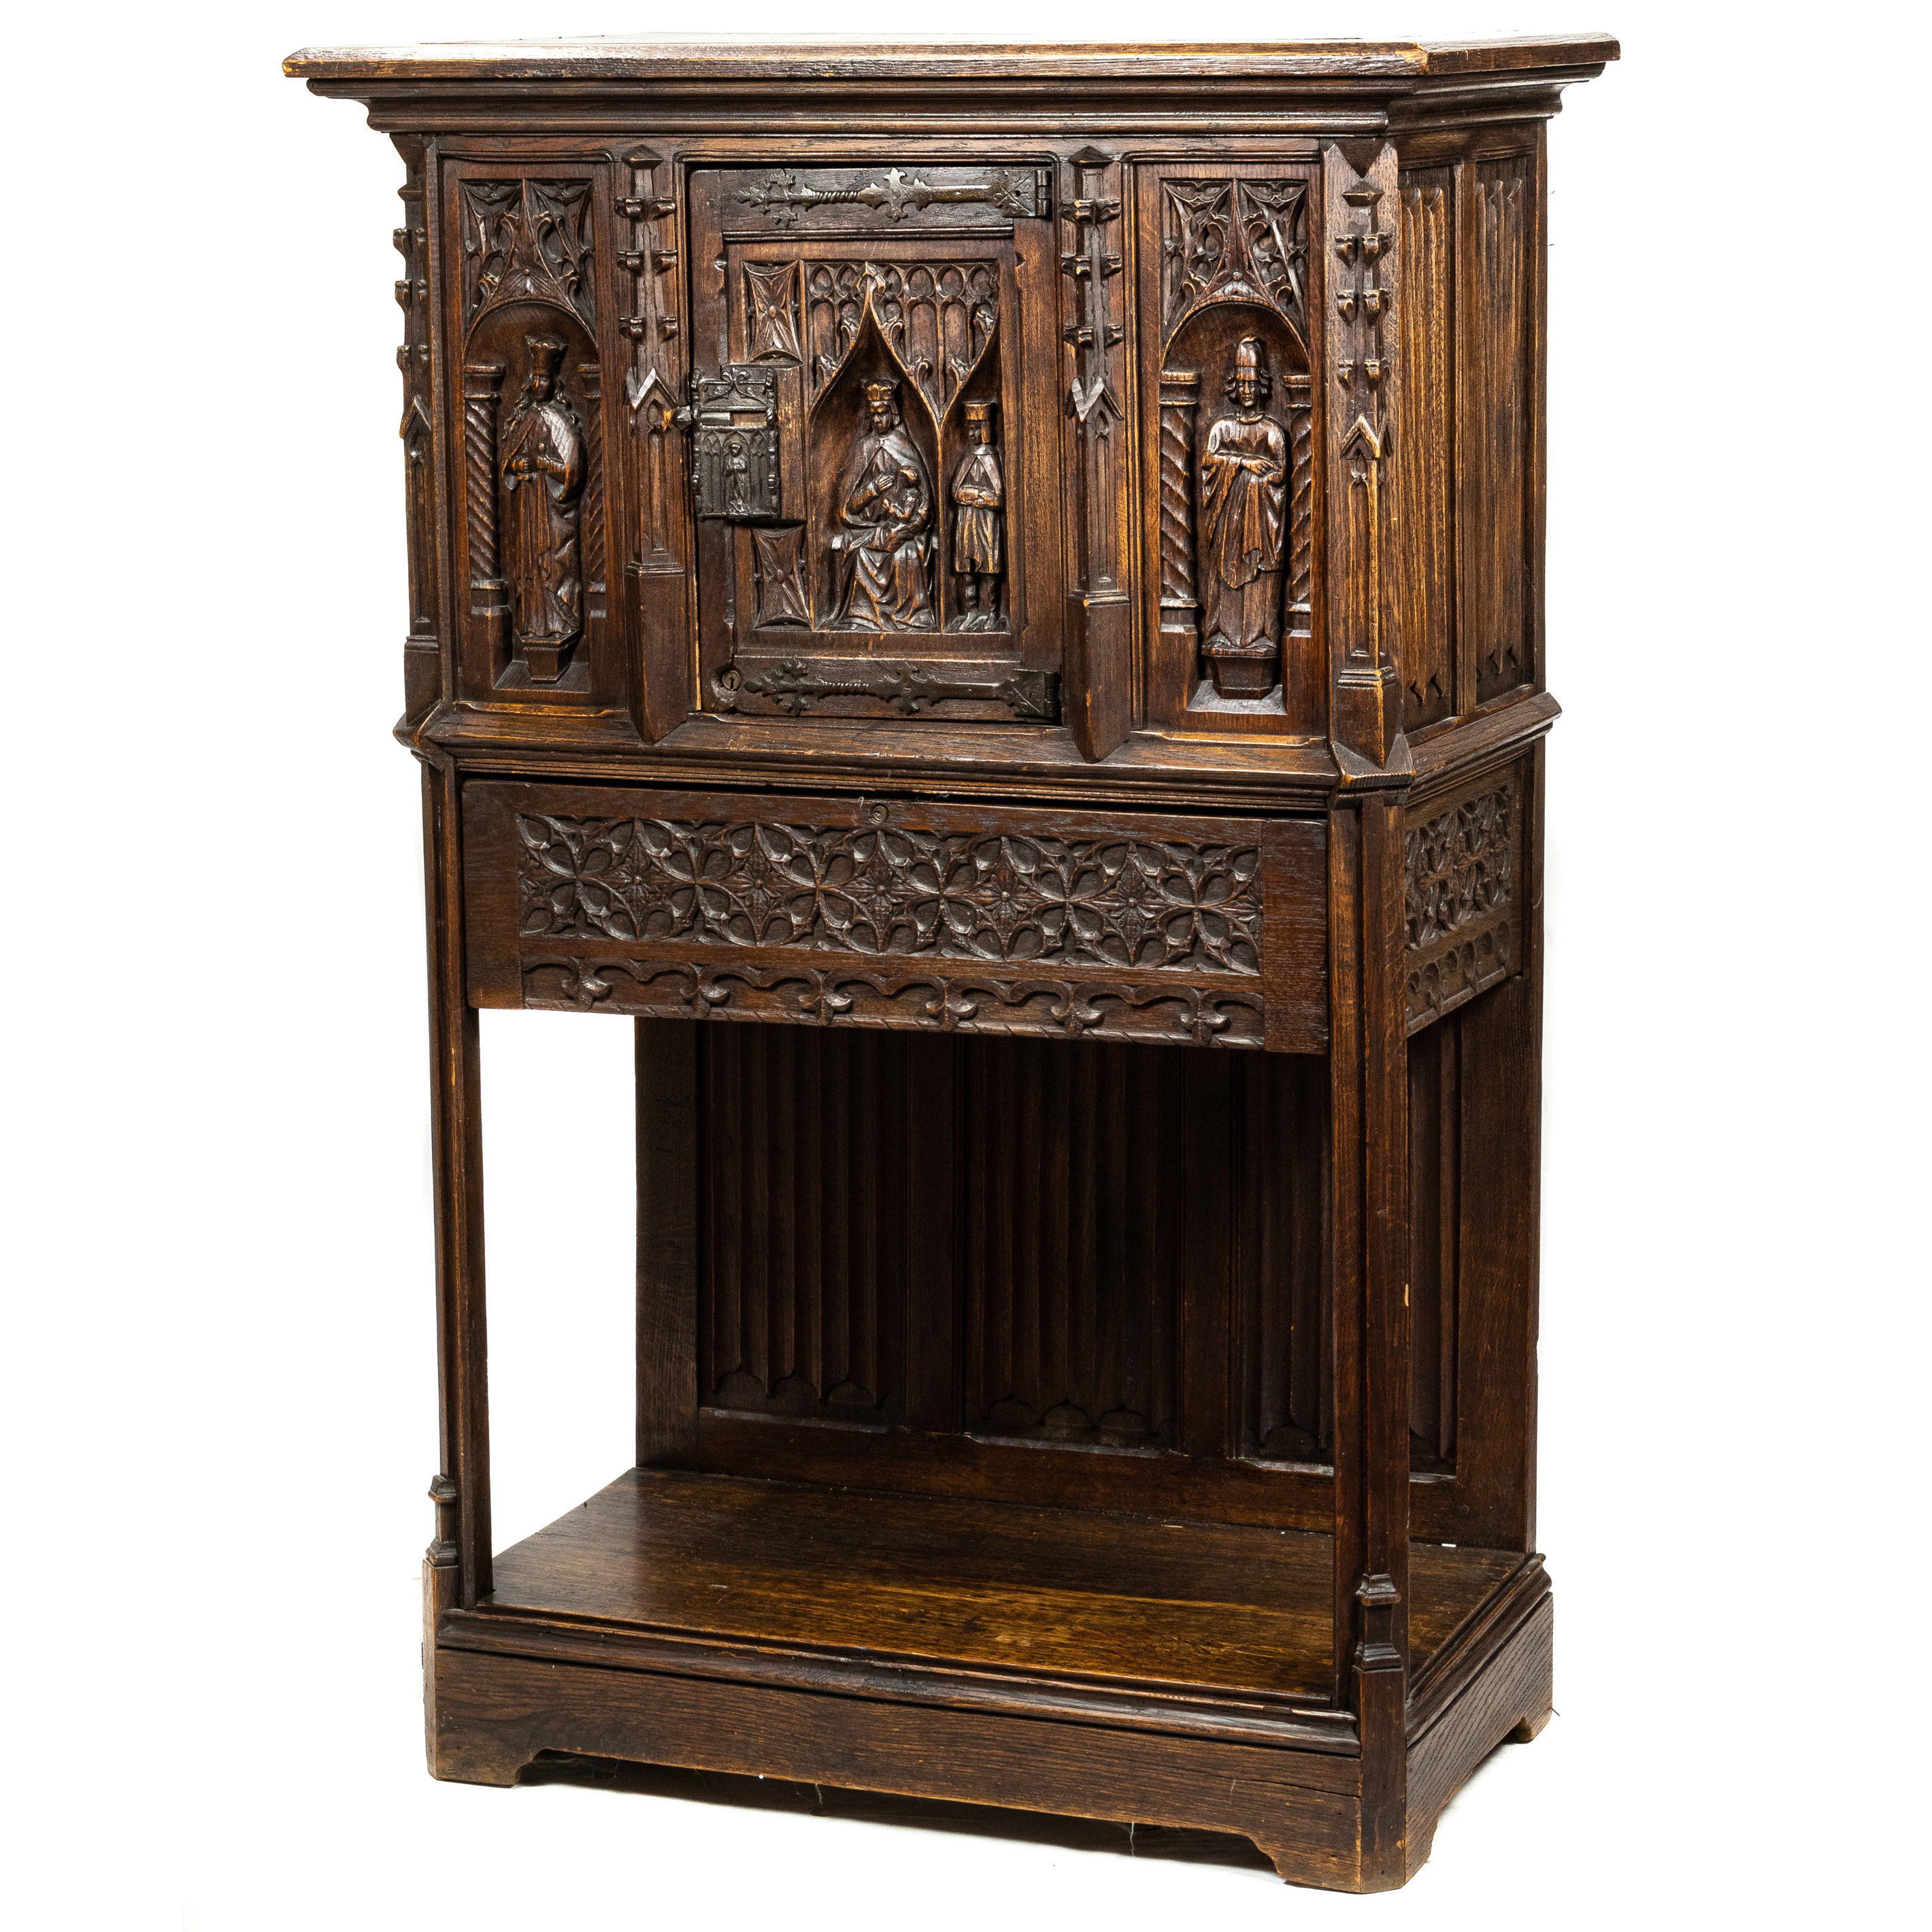 A FRENCH GOTHIC REVIVAL COURT CABINET 3a46ed